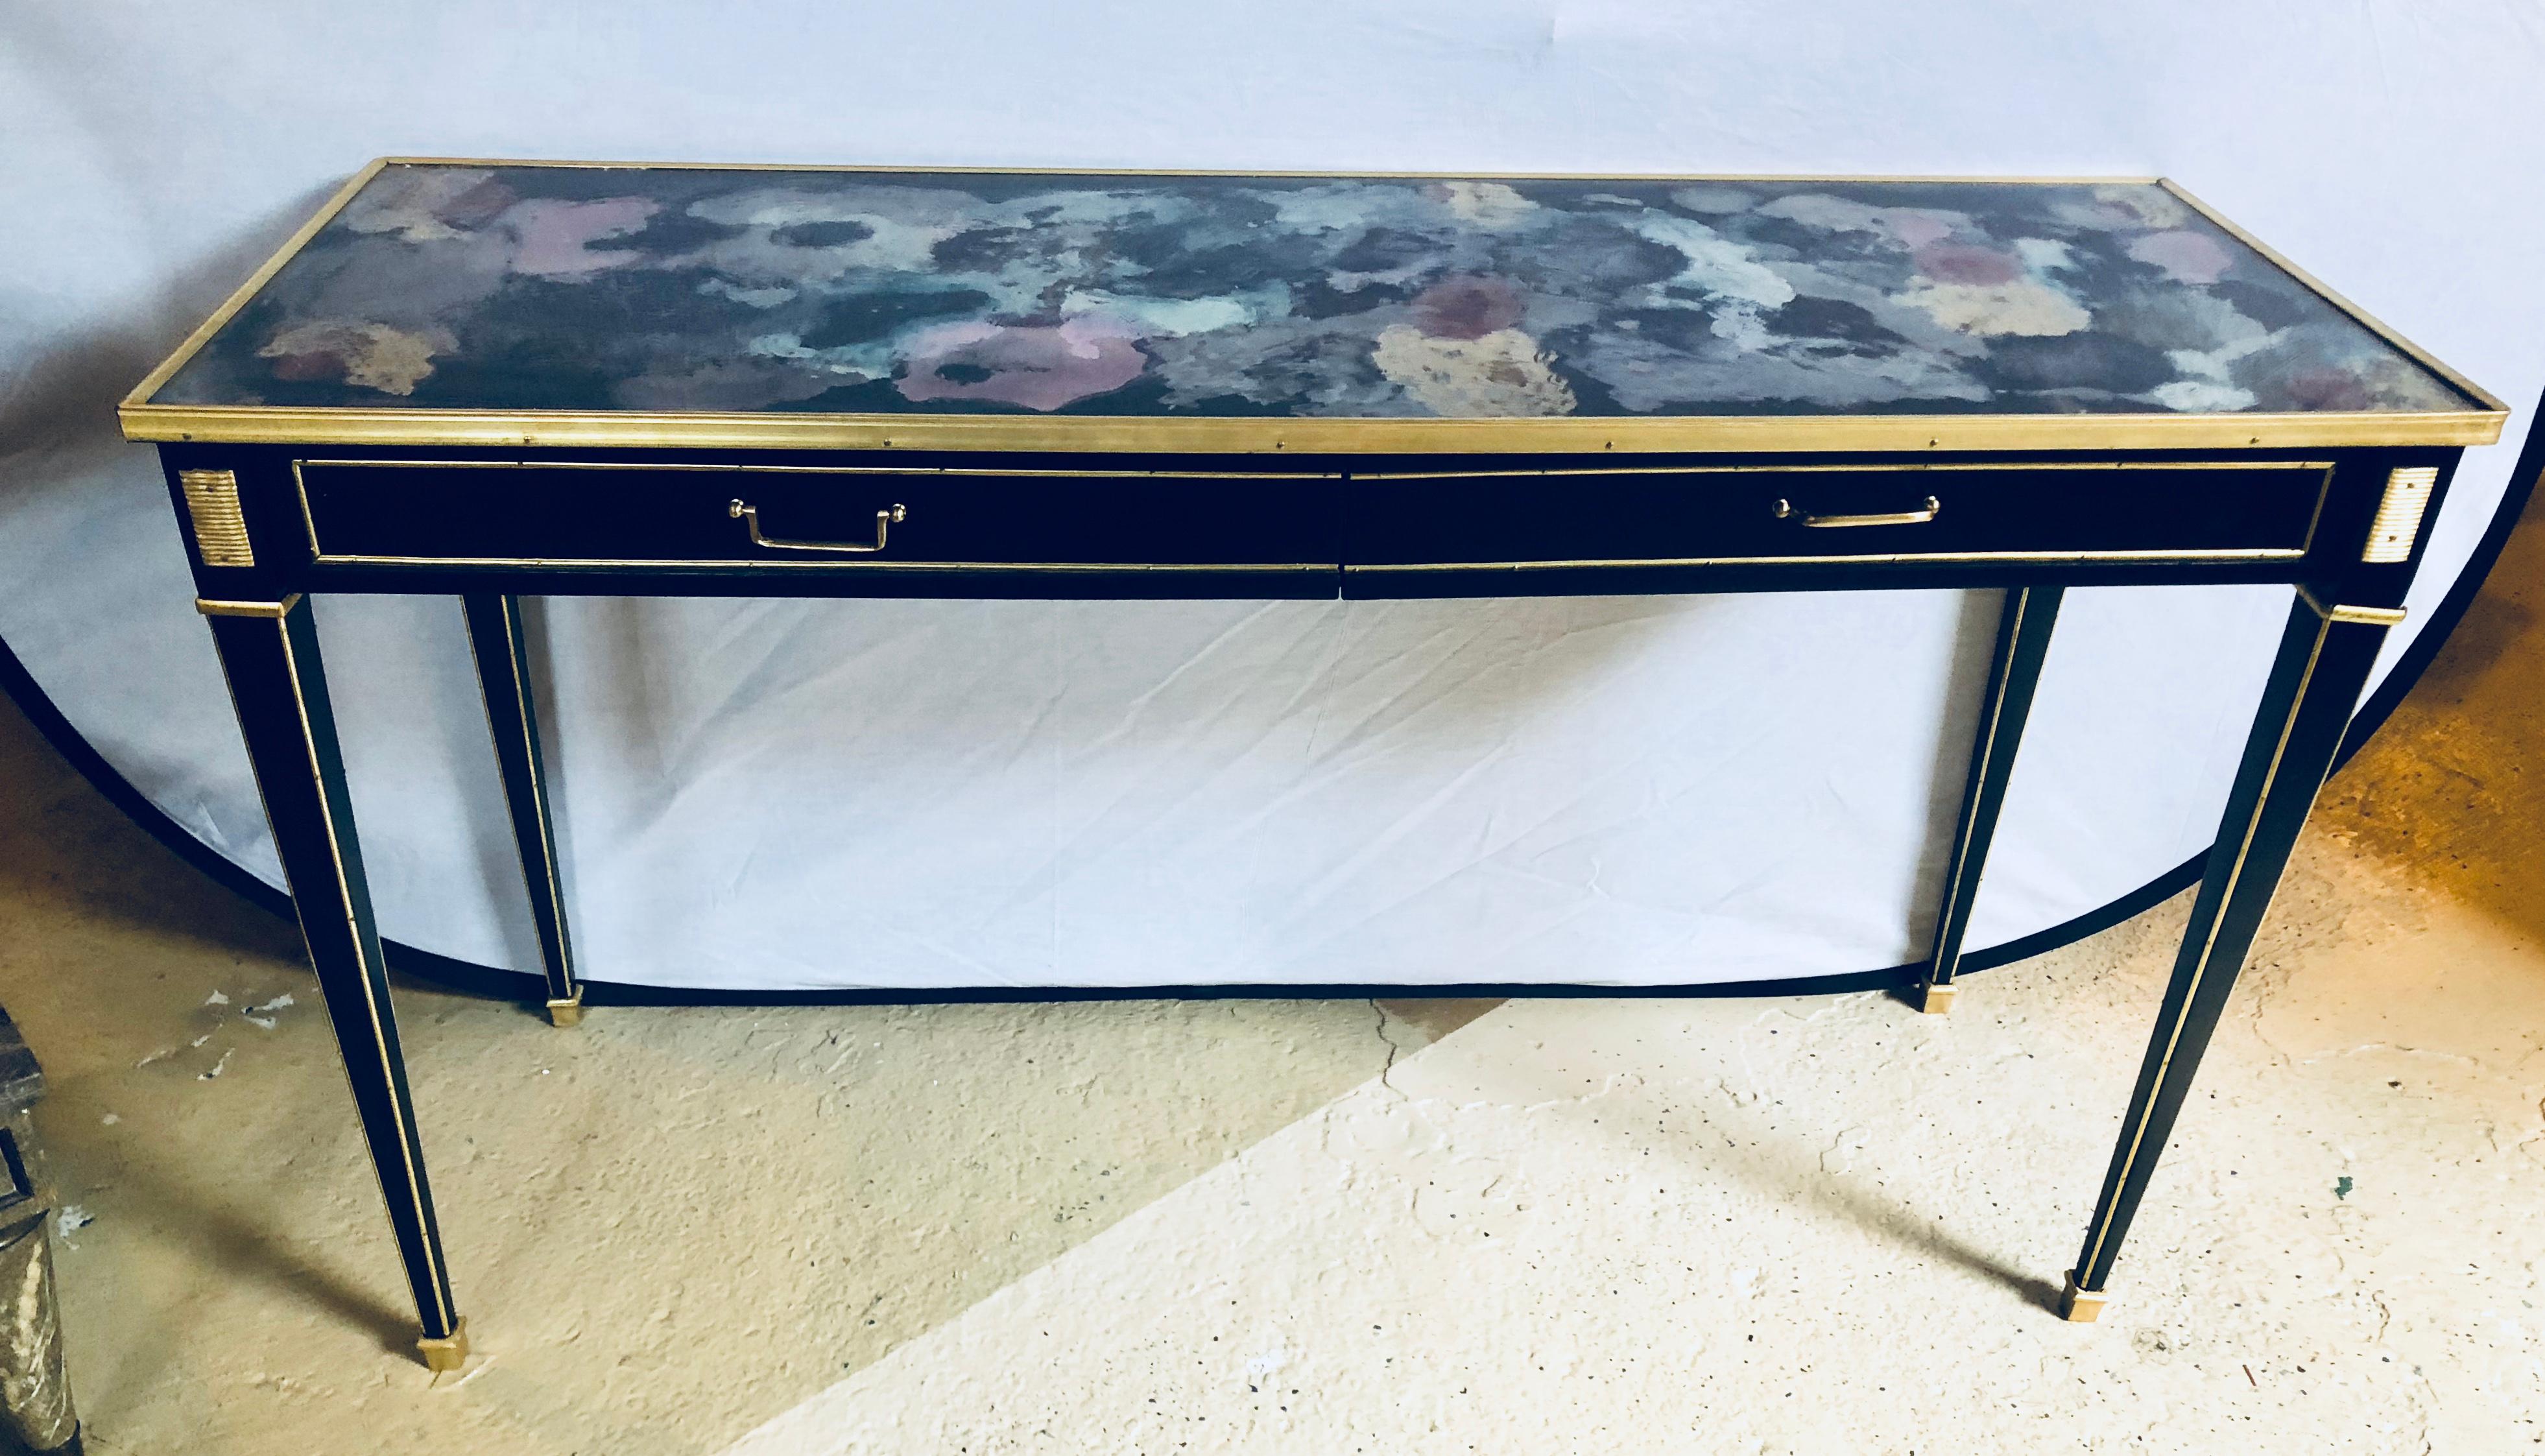 Pair of Hollywood regency style multi rainbow colored mirrored top bronze-mounted console tables. Each of these custom quality console tables have a colorful mirrored tabletop framed in a bronze apron above two large drawers all bronze framed with